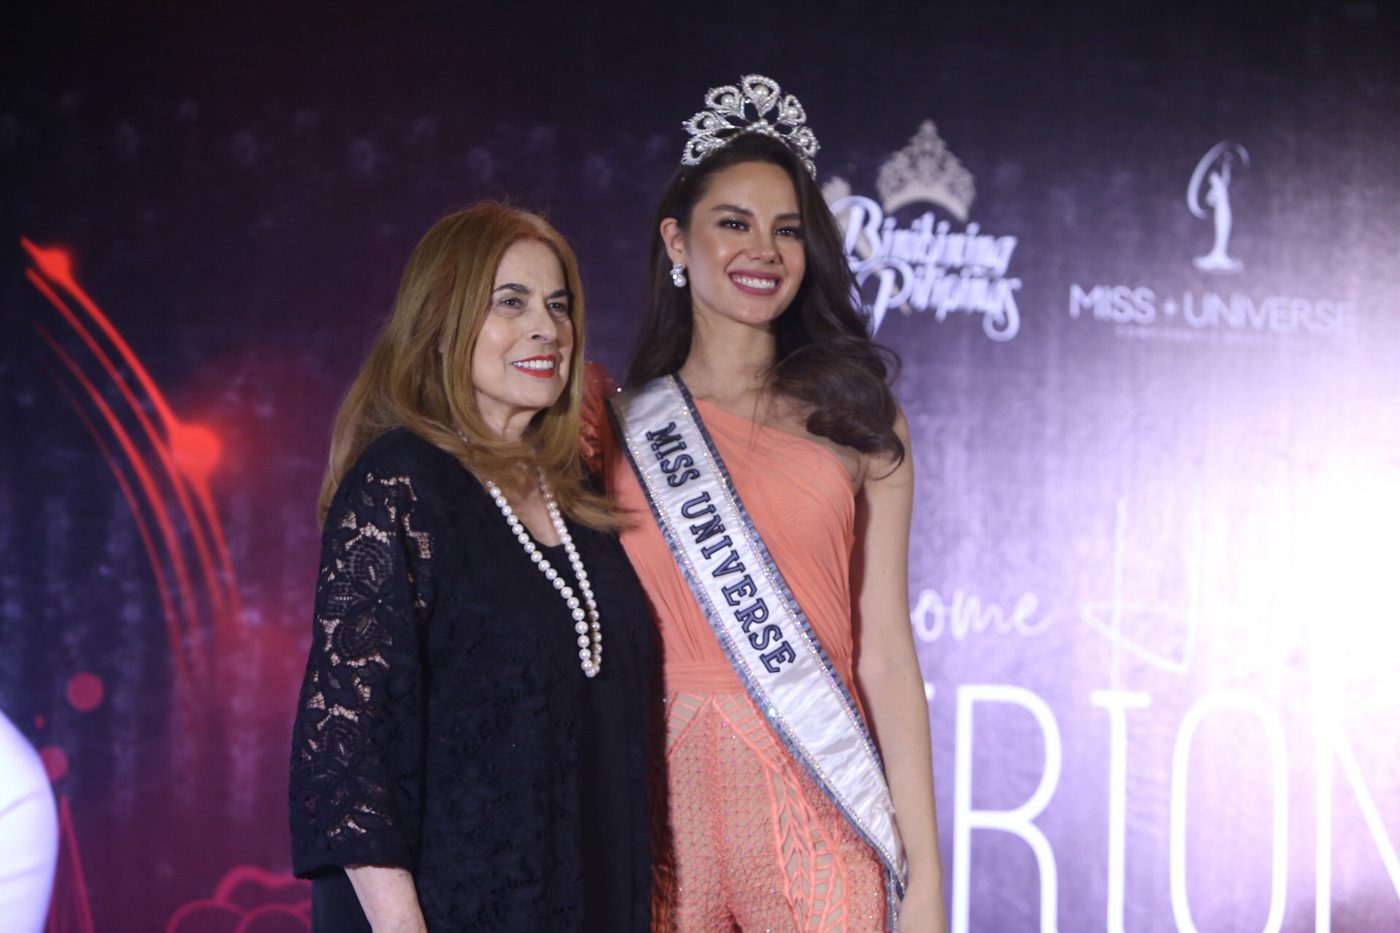 Miss Universe Philippines franchise stays with Bb Pilipinas – report